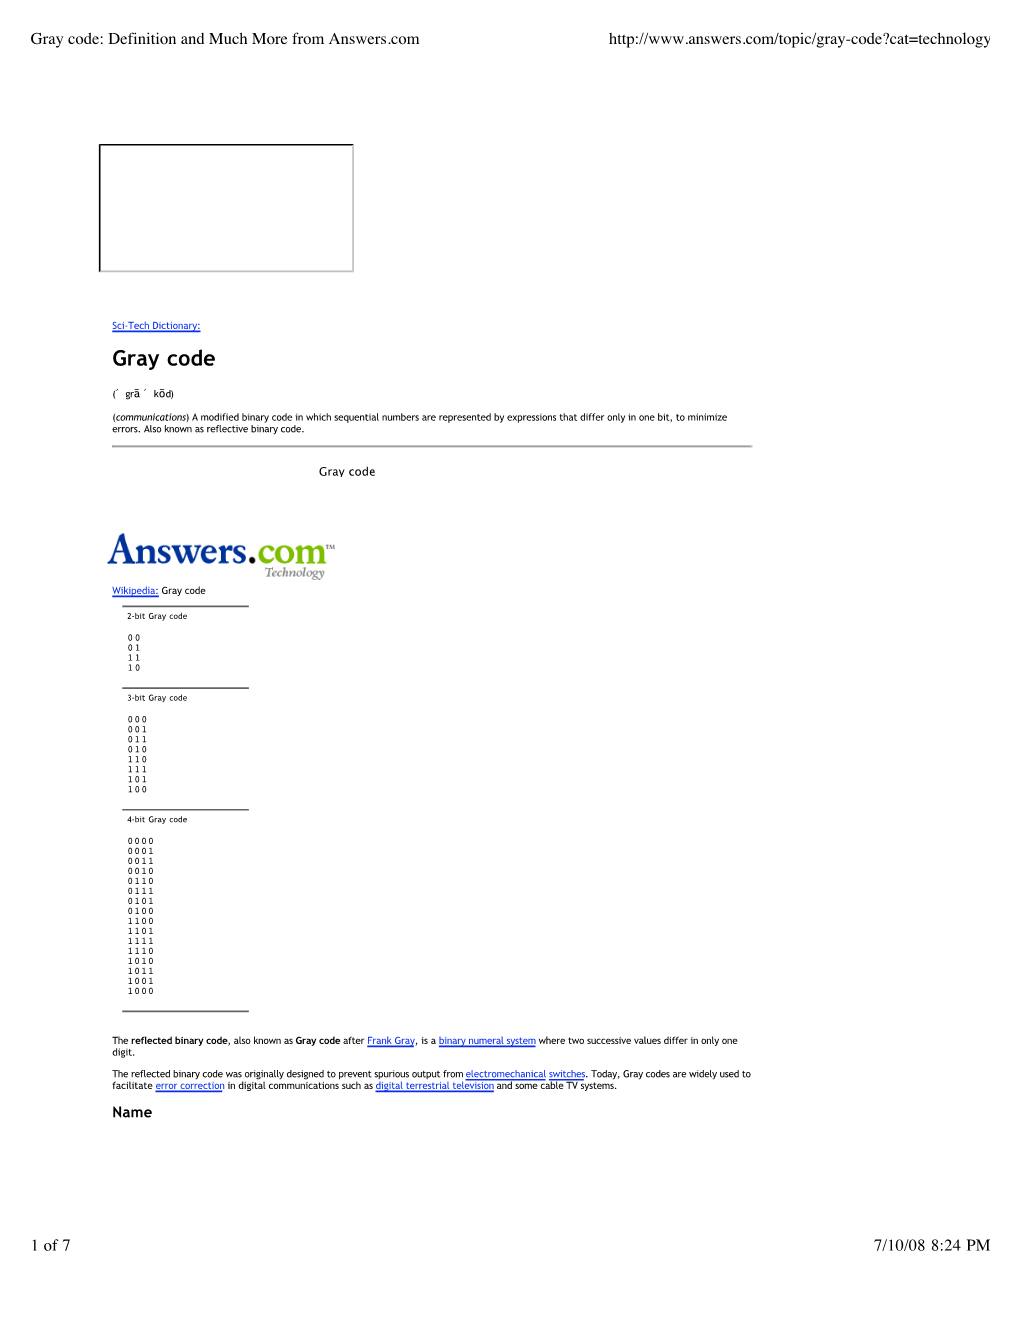 Answers.Com Gray Codes Page